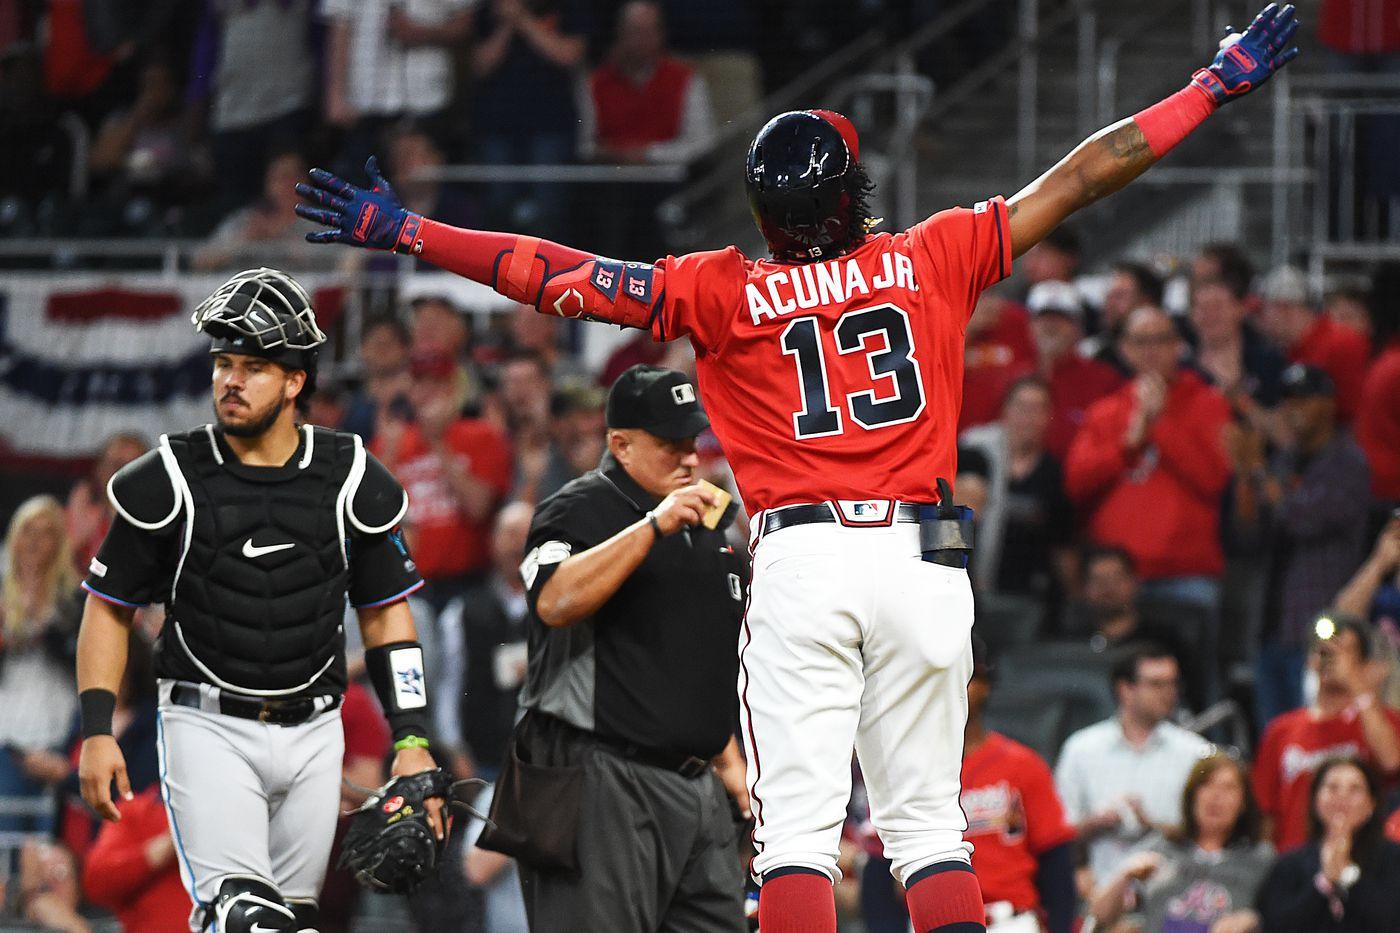 VIDEO: Ronald Acuña Jr. homers seconds after “sophomore